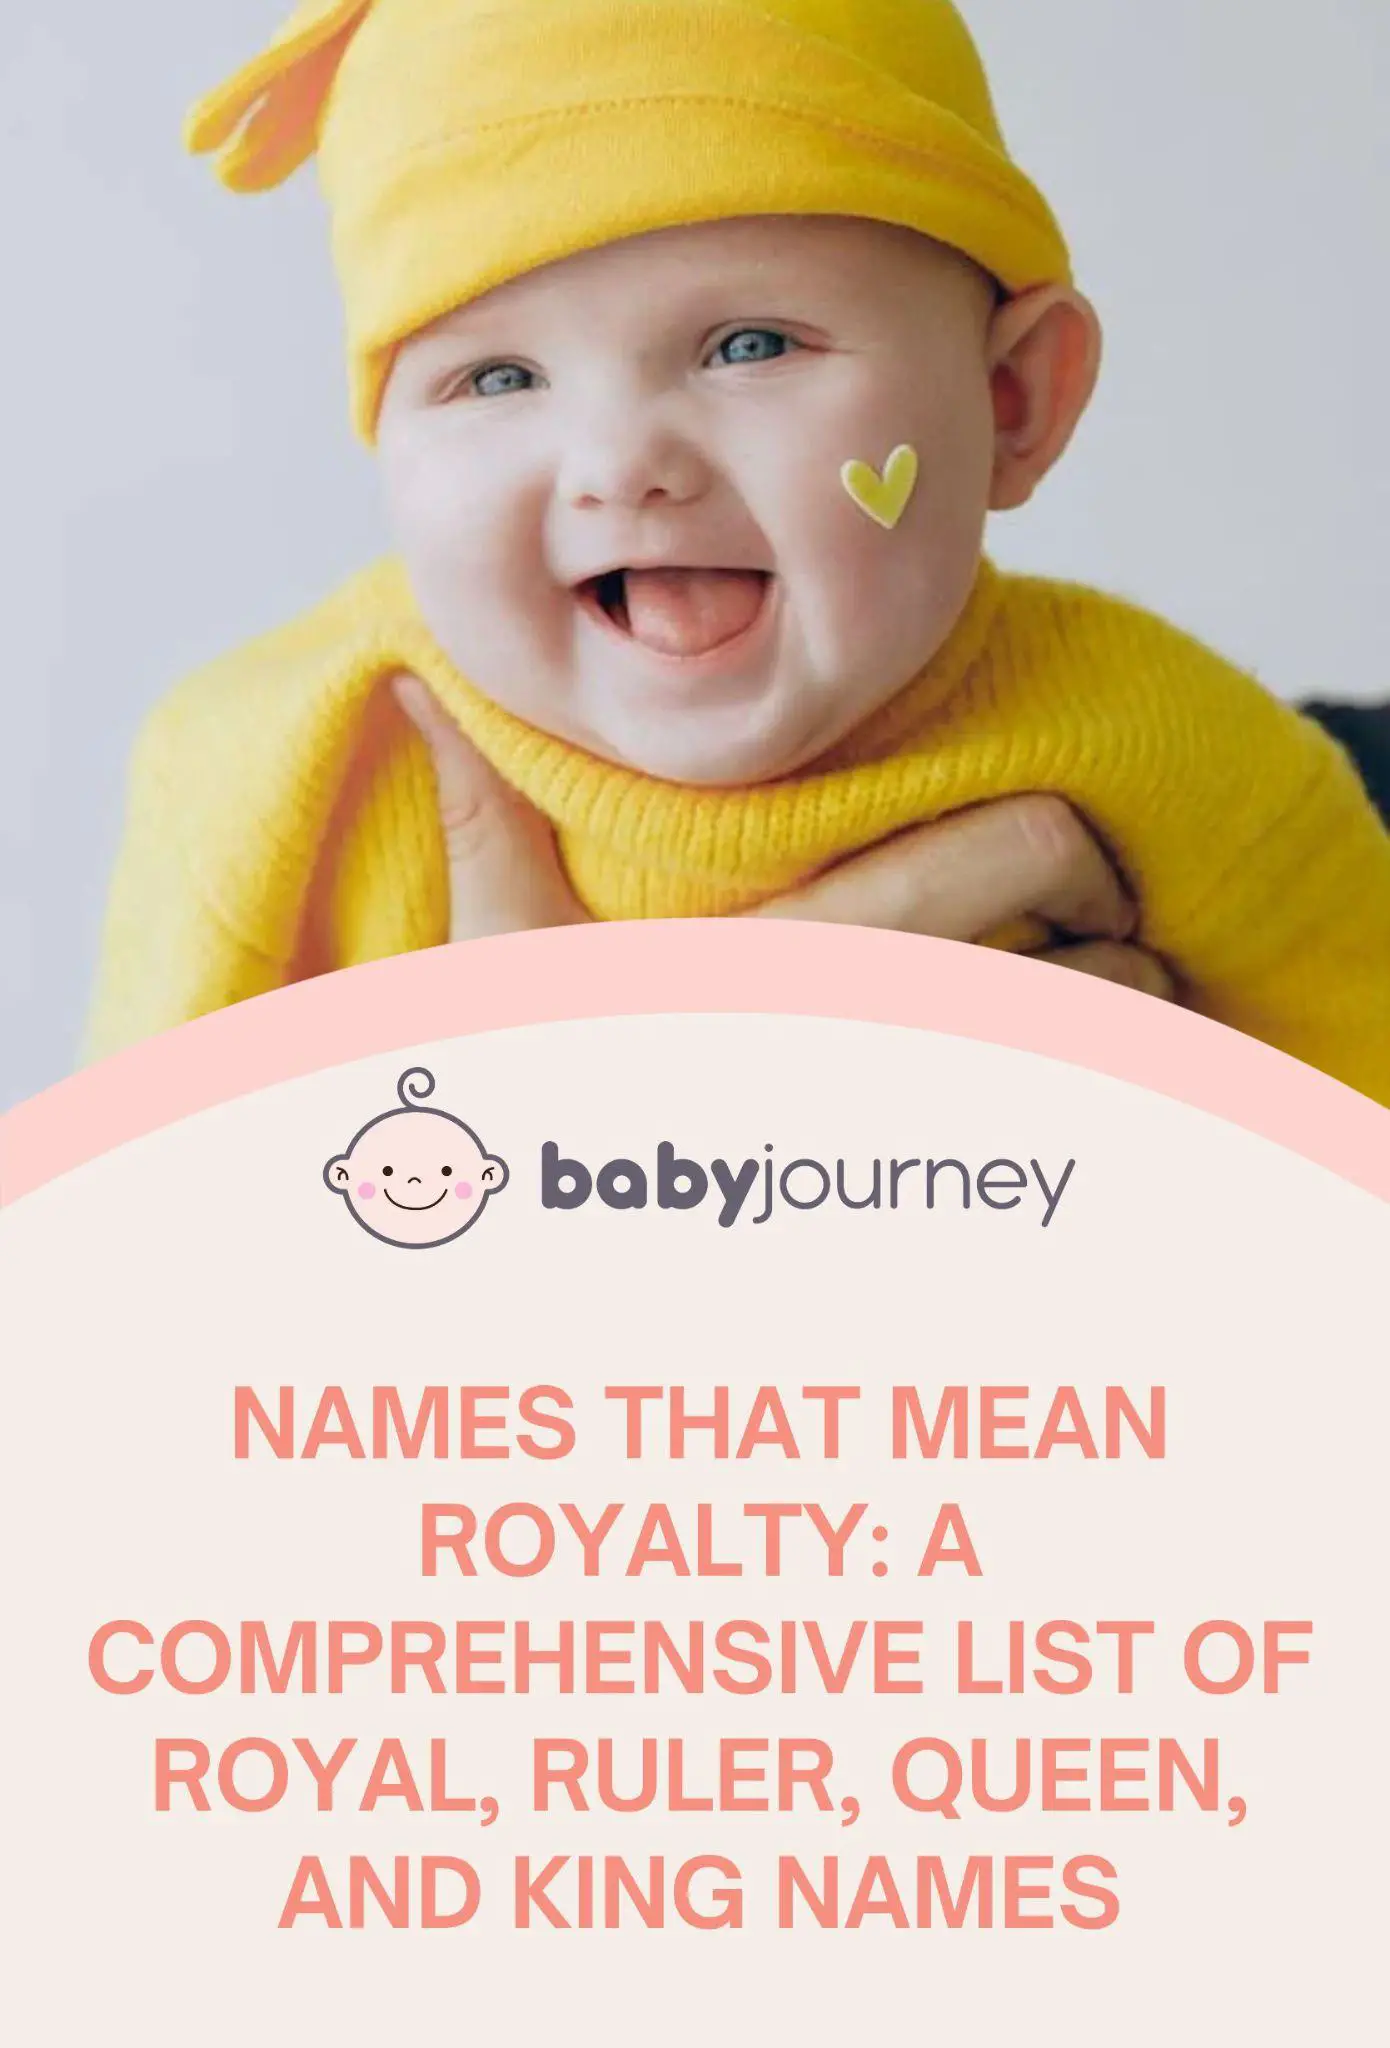 150+ Names That Mean Royalty: A Comprehensive List of Royal, Ruler, Queen, and King Names - BabyJourney